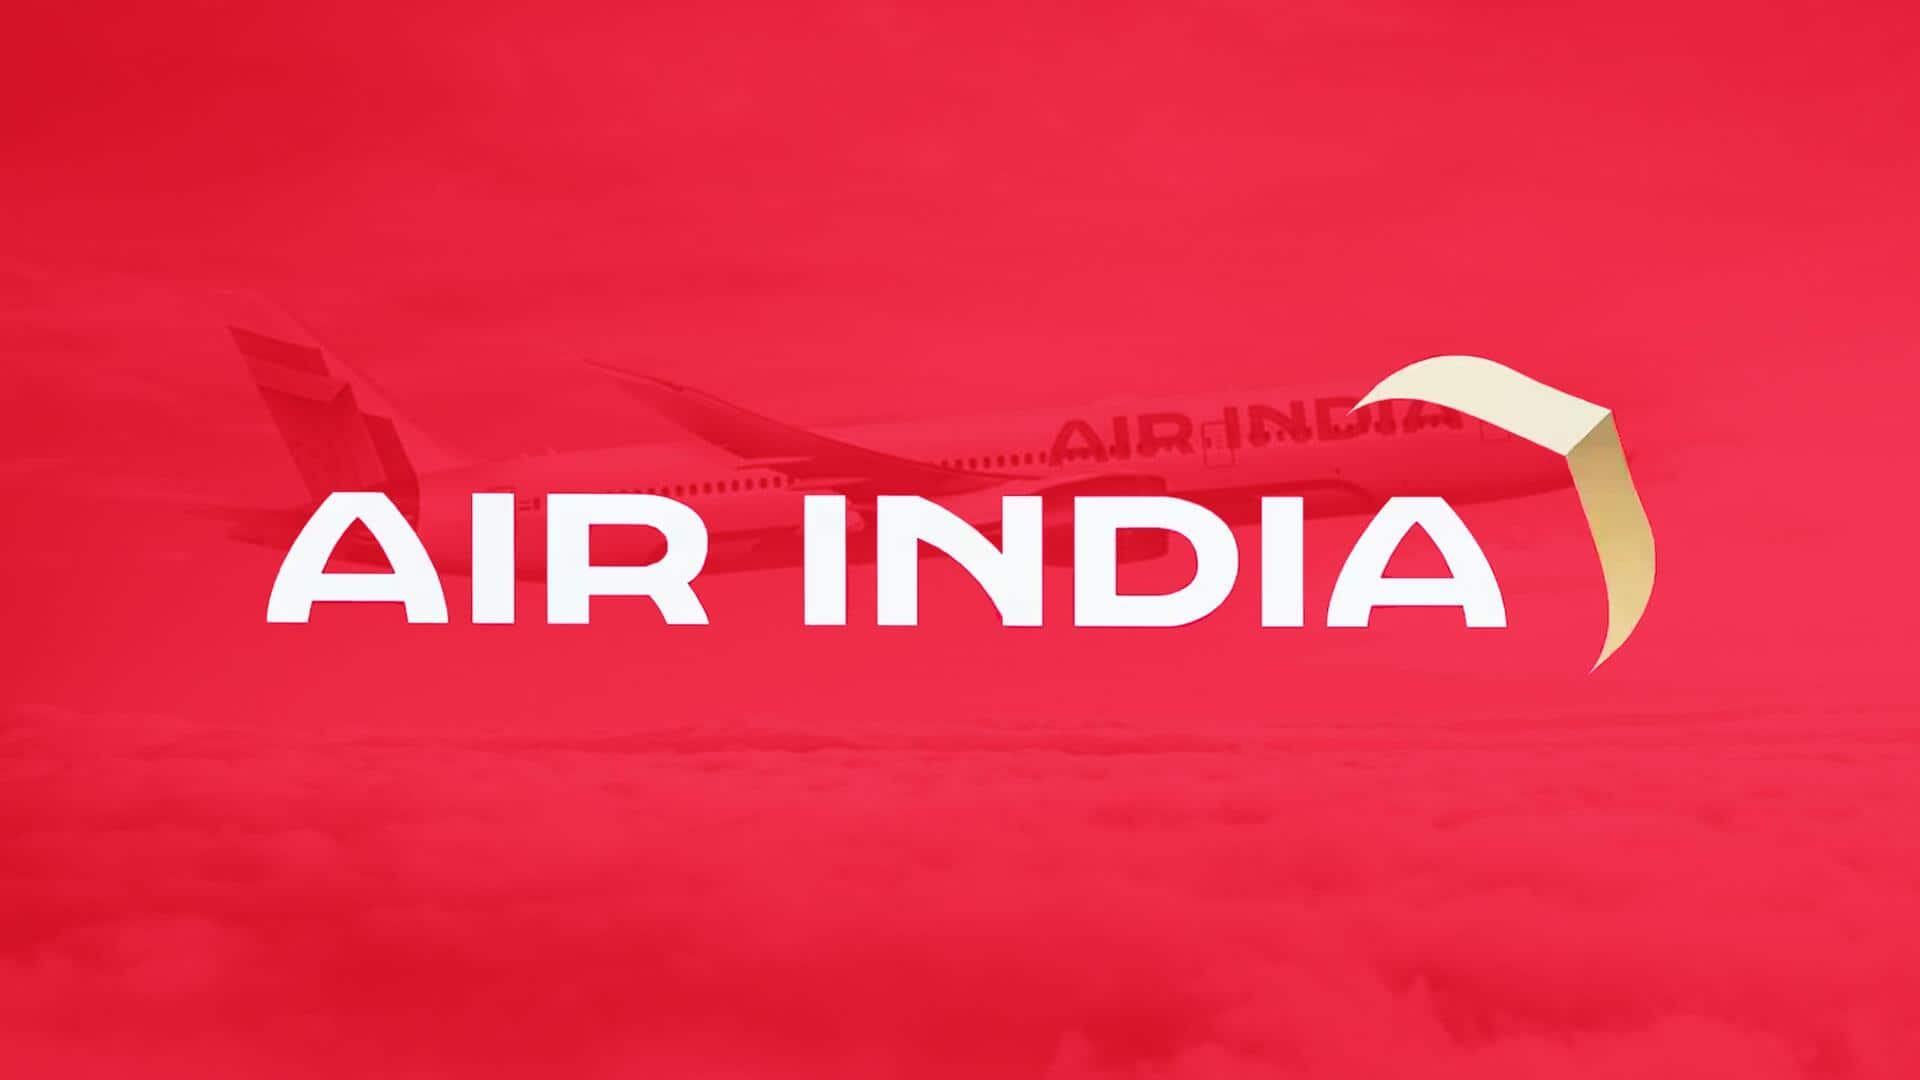 DGCA allegedly uncovers Air India's false safety audit reports